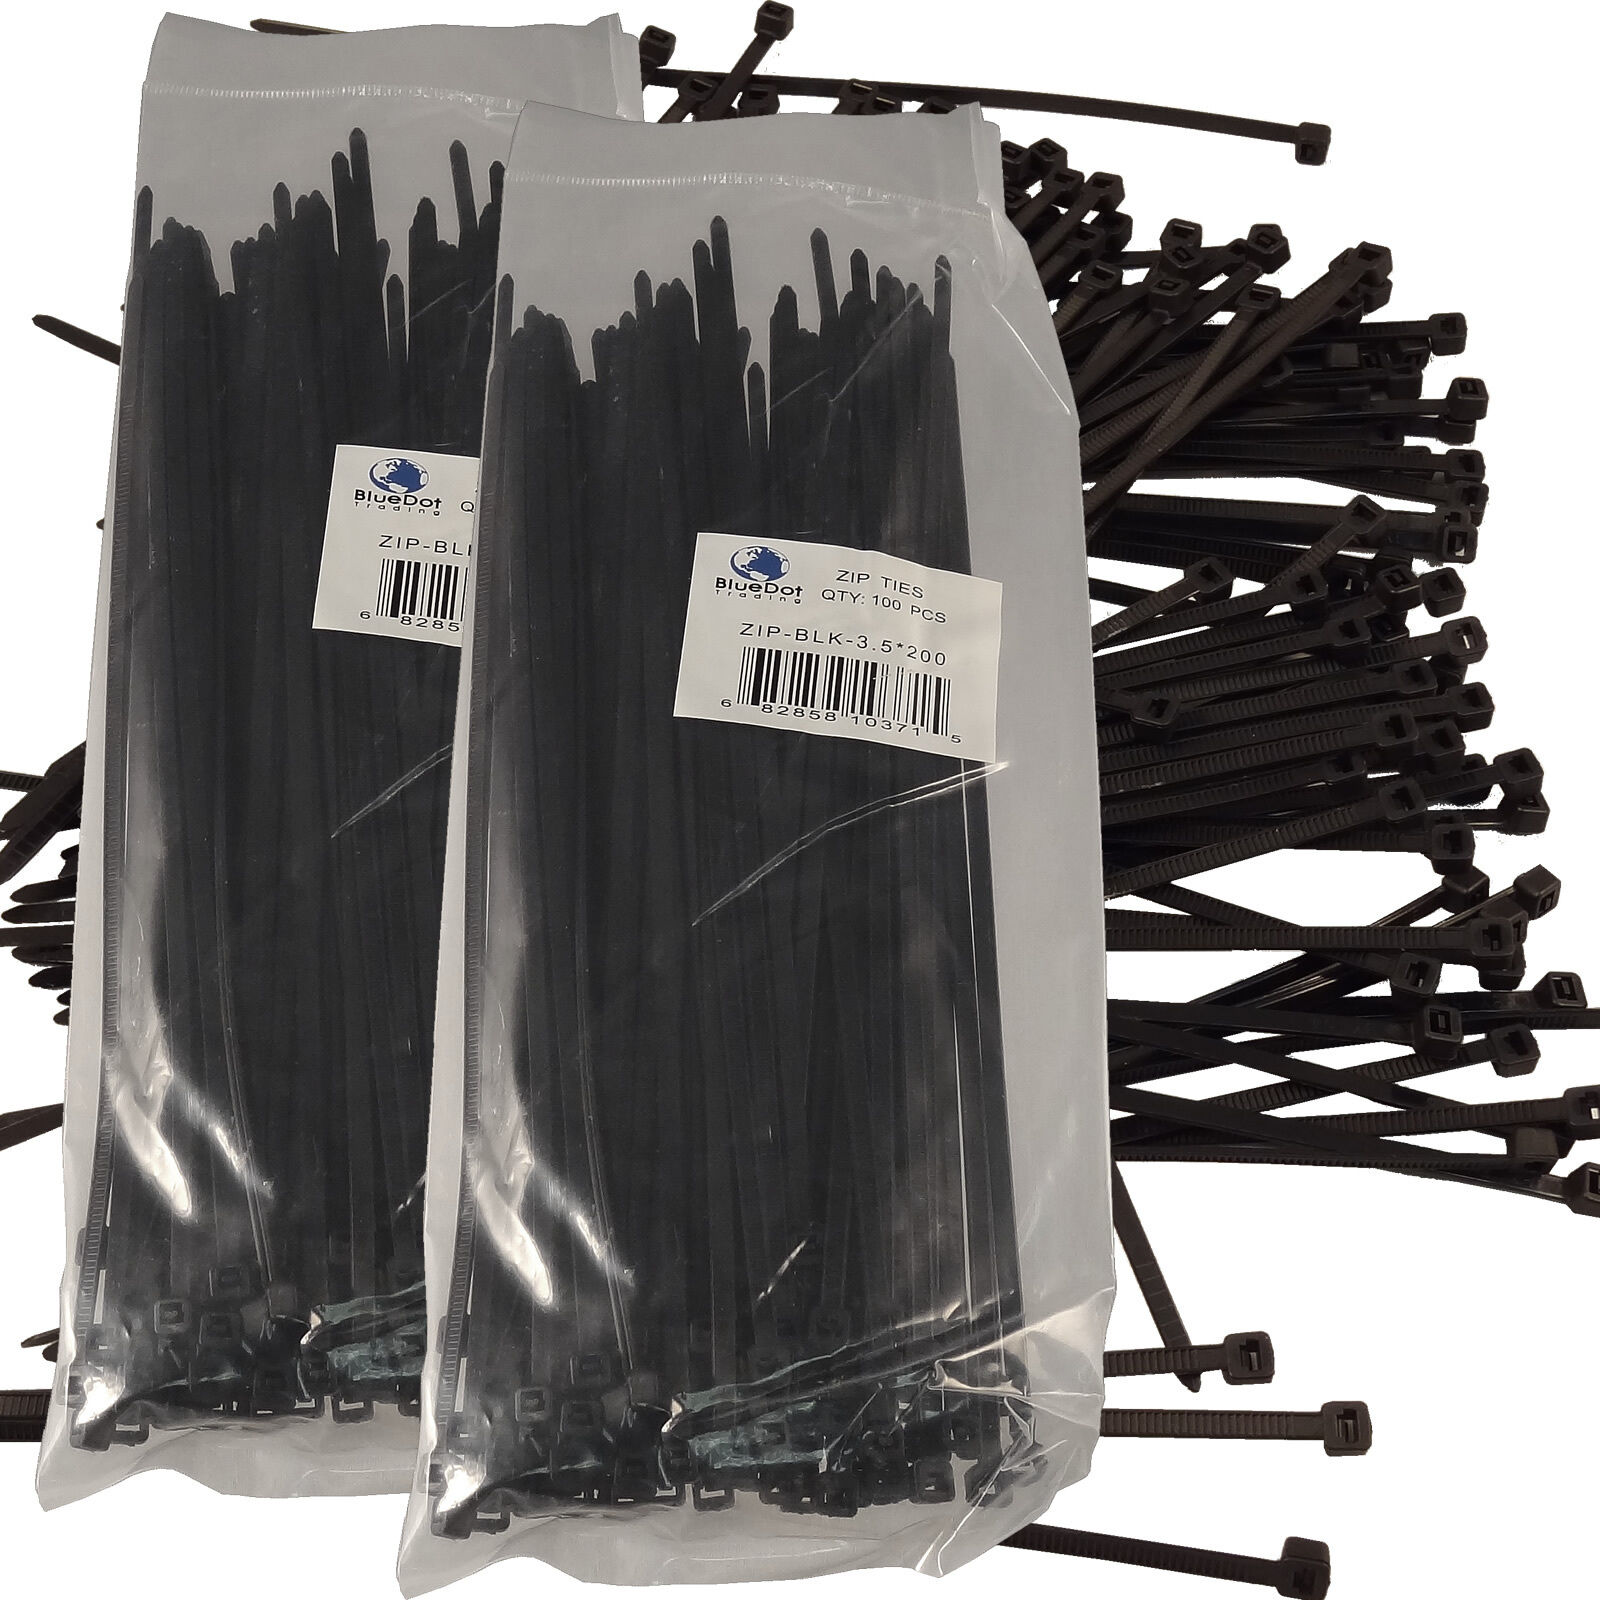 NEW BLACK 200 PCS. 8 INCH ZIP TIES NYLON 40 LBS UV WEATHER RESISTANT WIRE CABLE